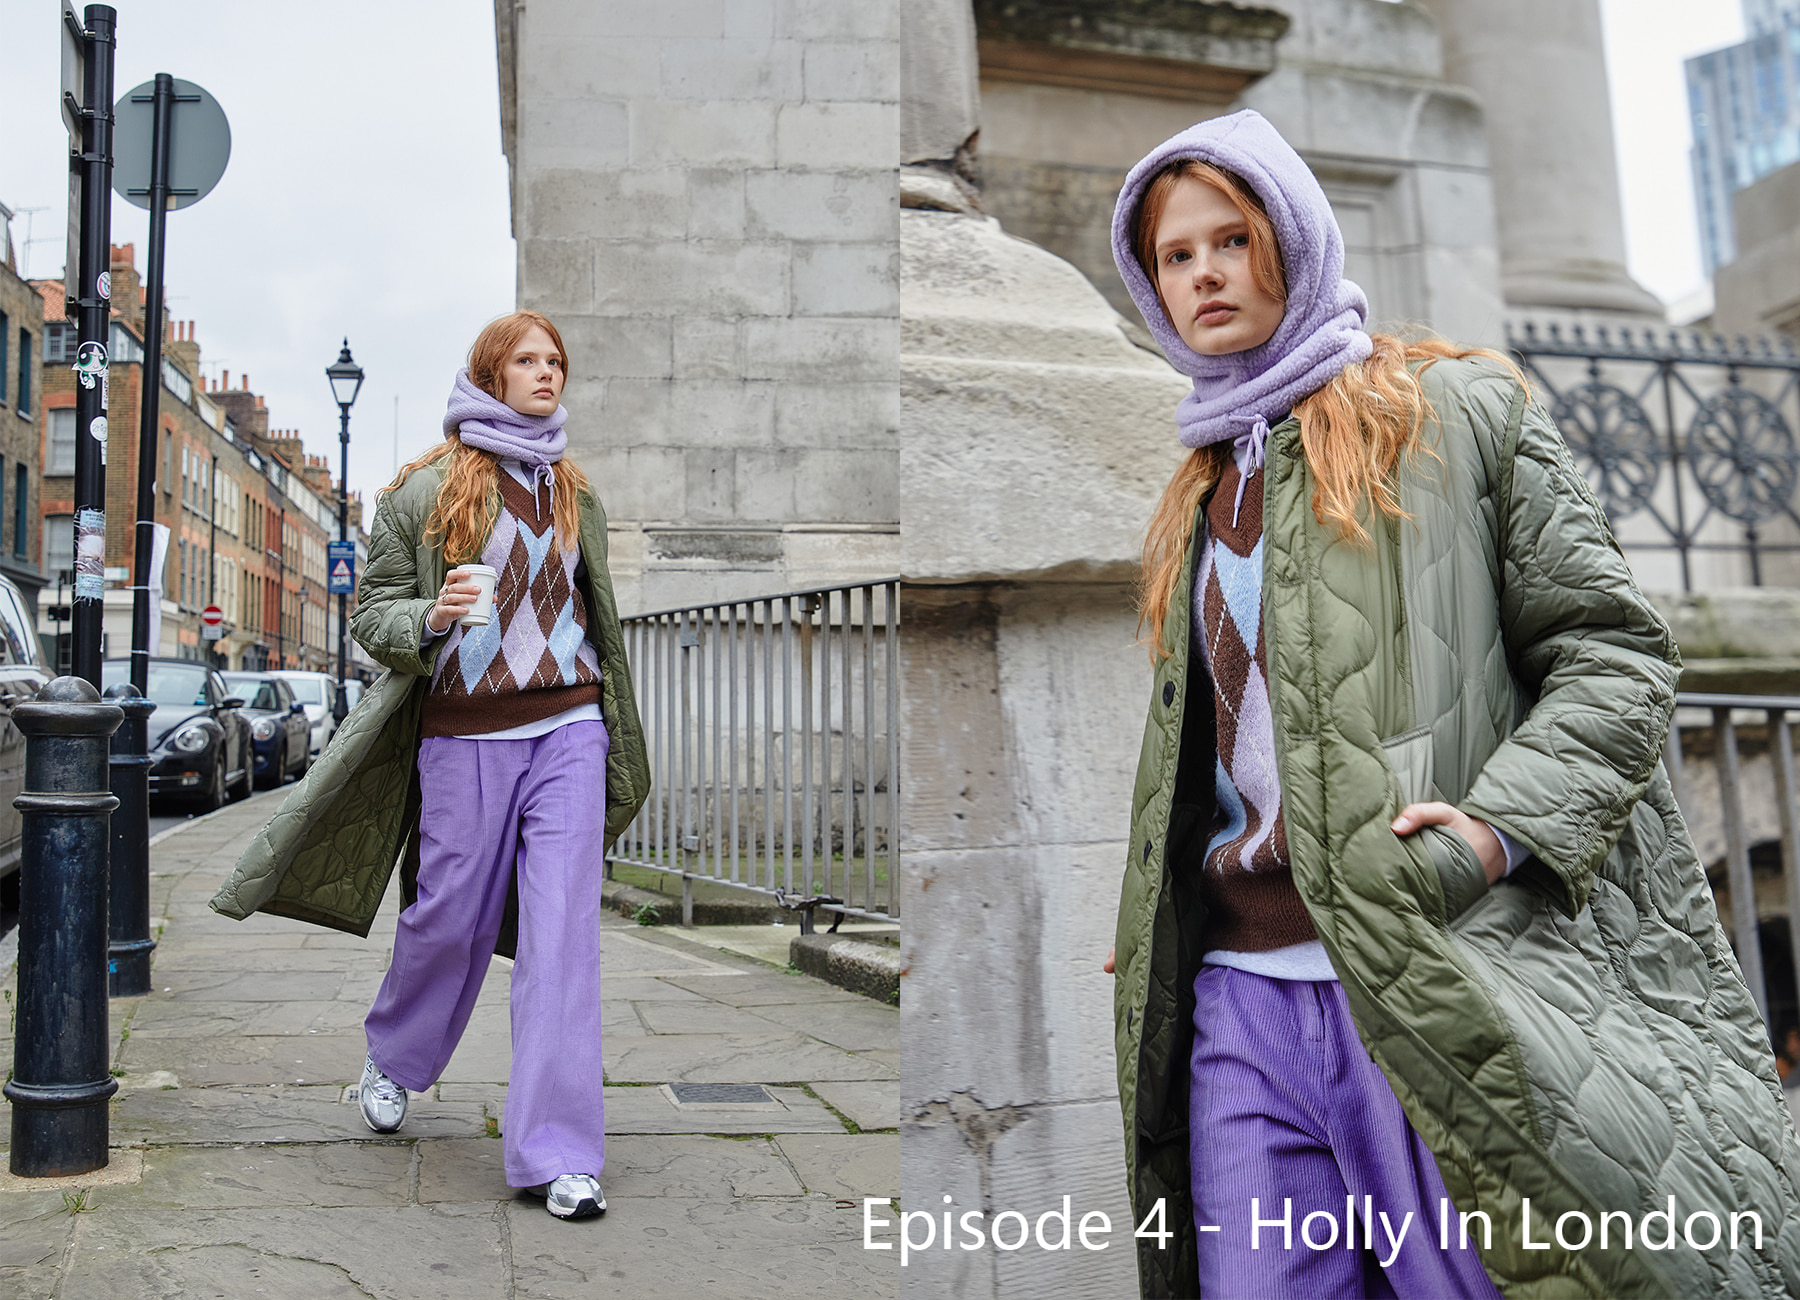 Episode 4 - Holly In London